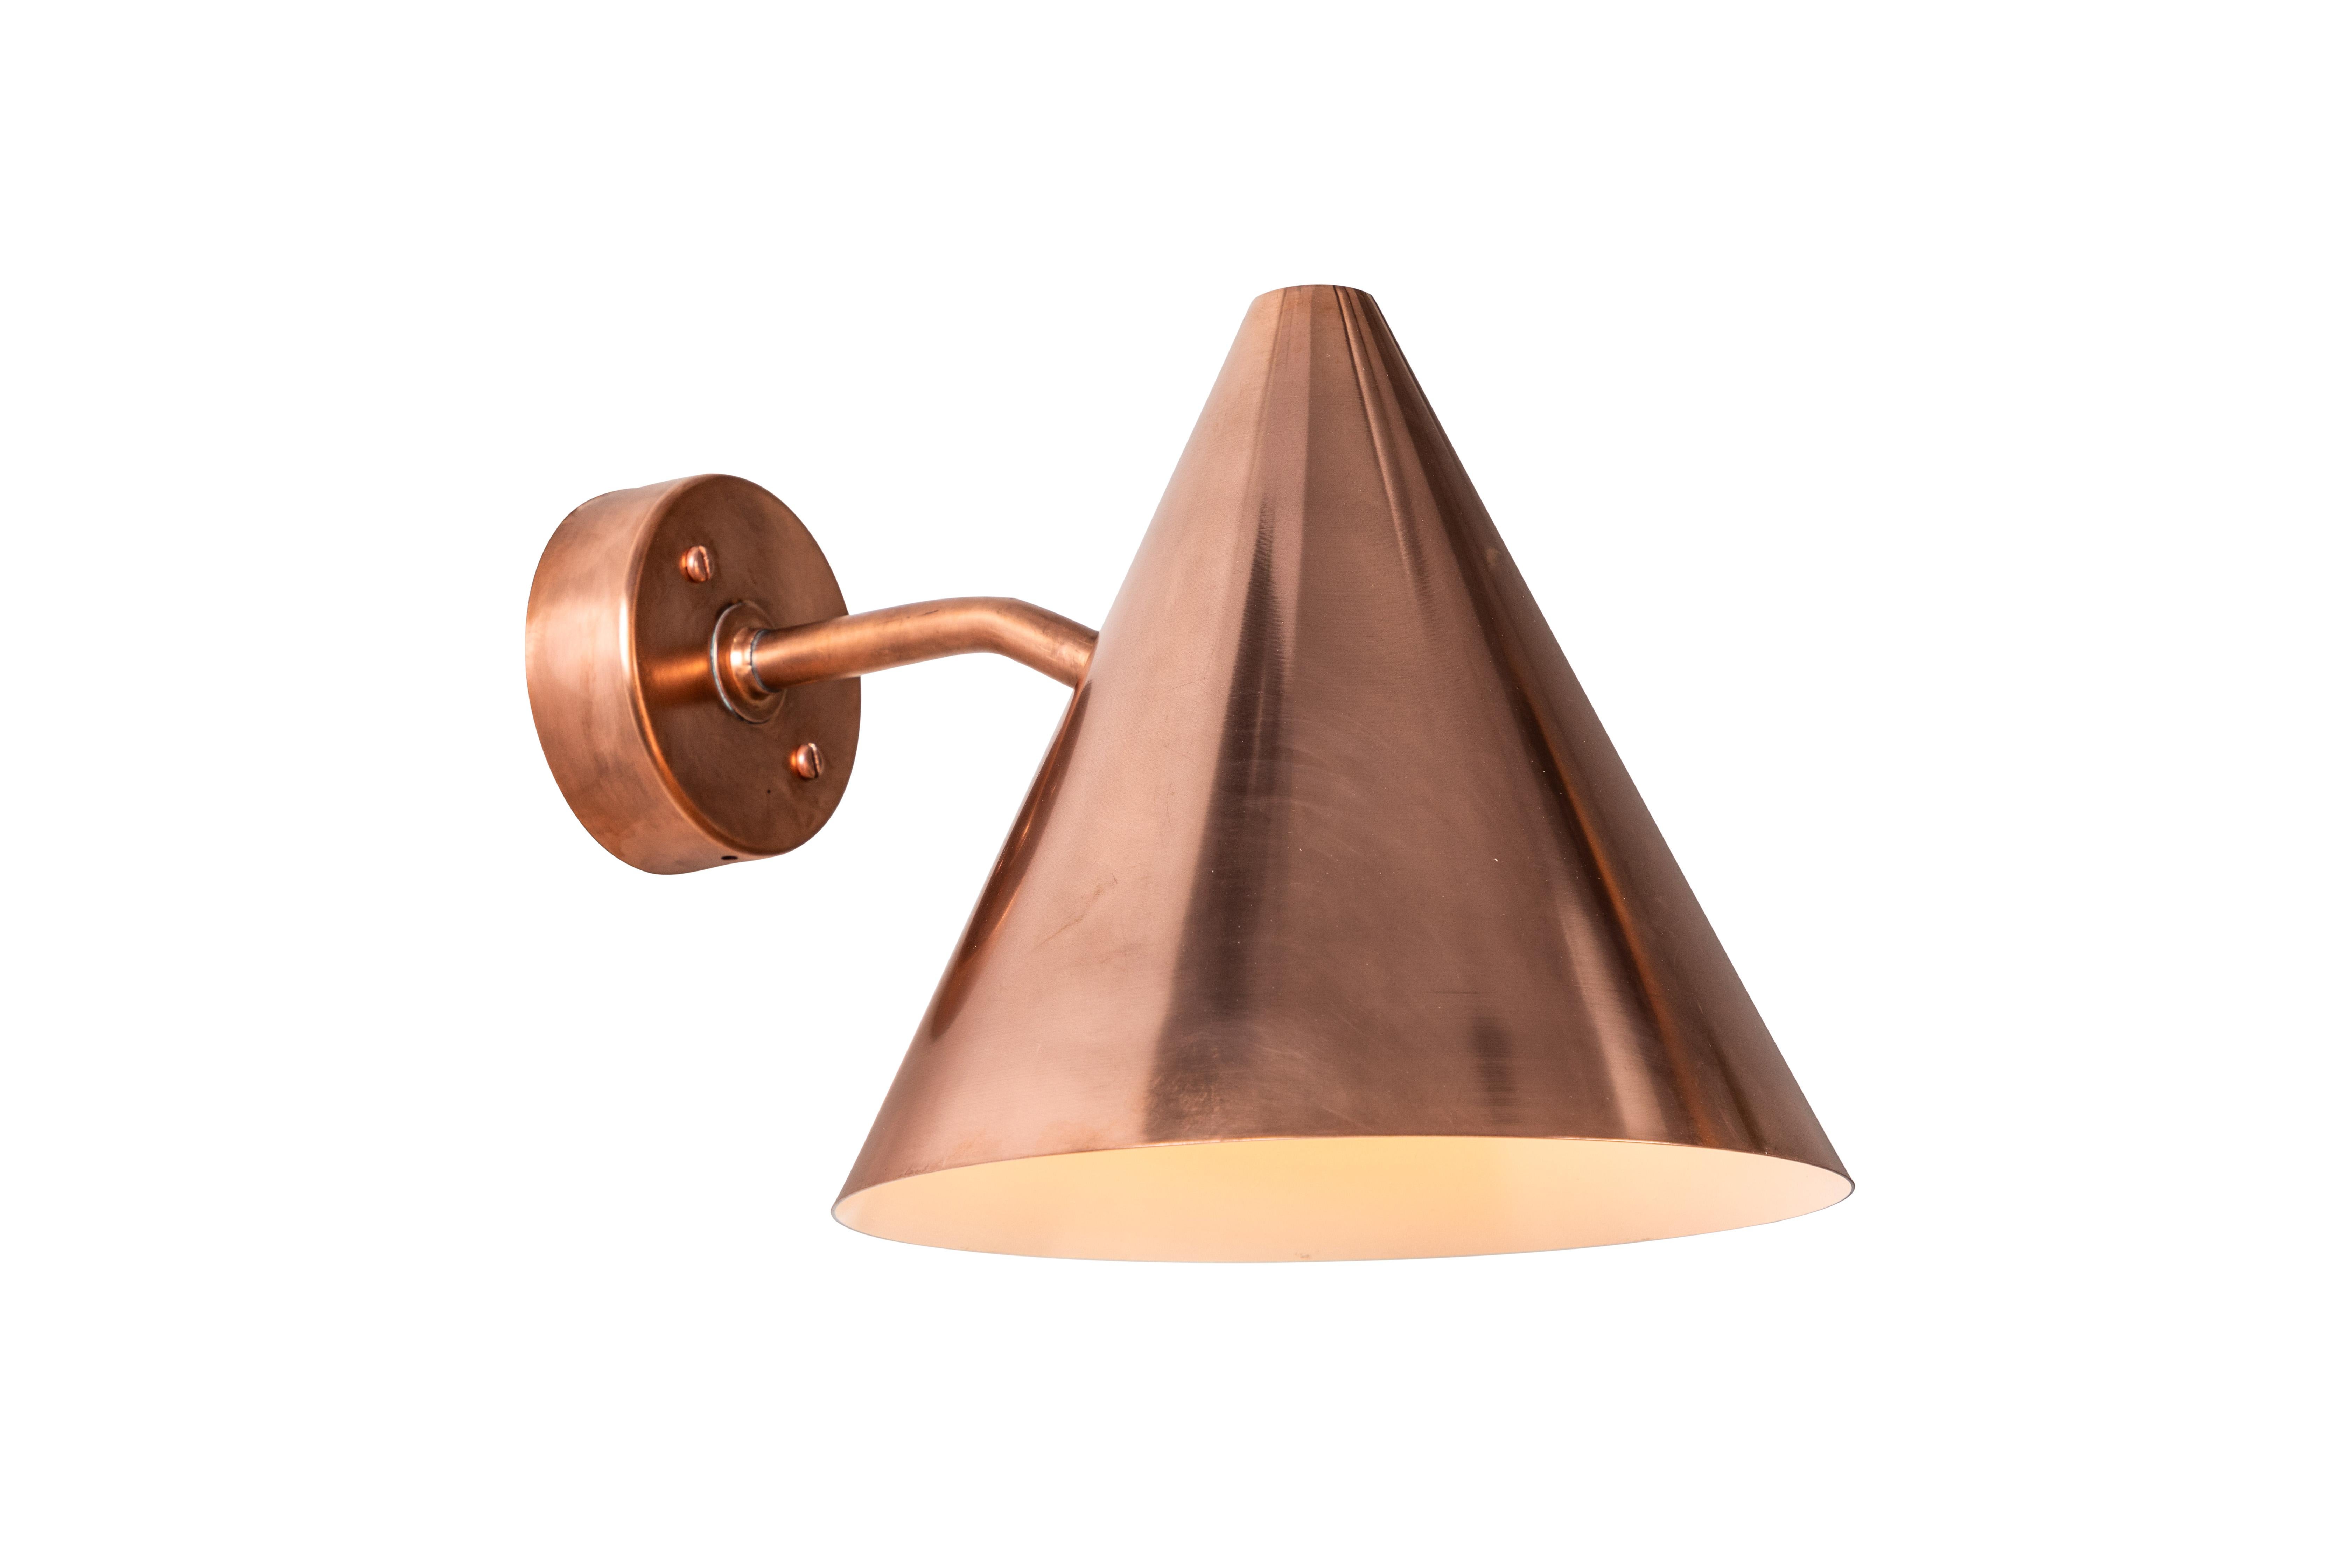 Pair of Hans-Agne Jakobsson 'Tratten' raw copper outdoor sconces. An exclusive made for U.S. and UL listed authorized re-edition of the classic Swedish design executed in raw un-lacquered polished copper with white painted interior. Suitable for